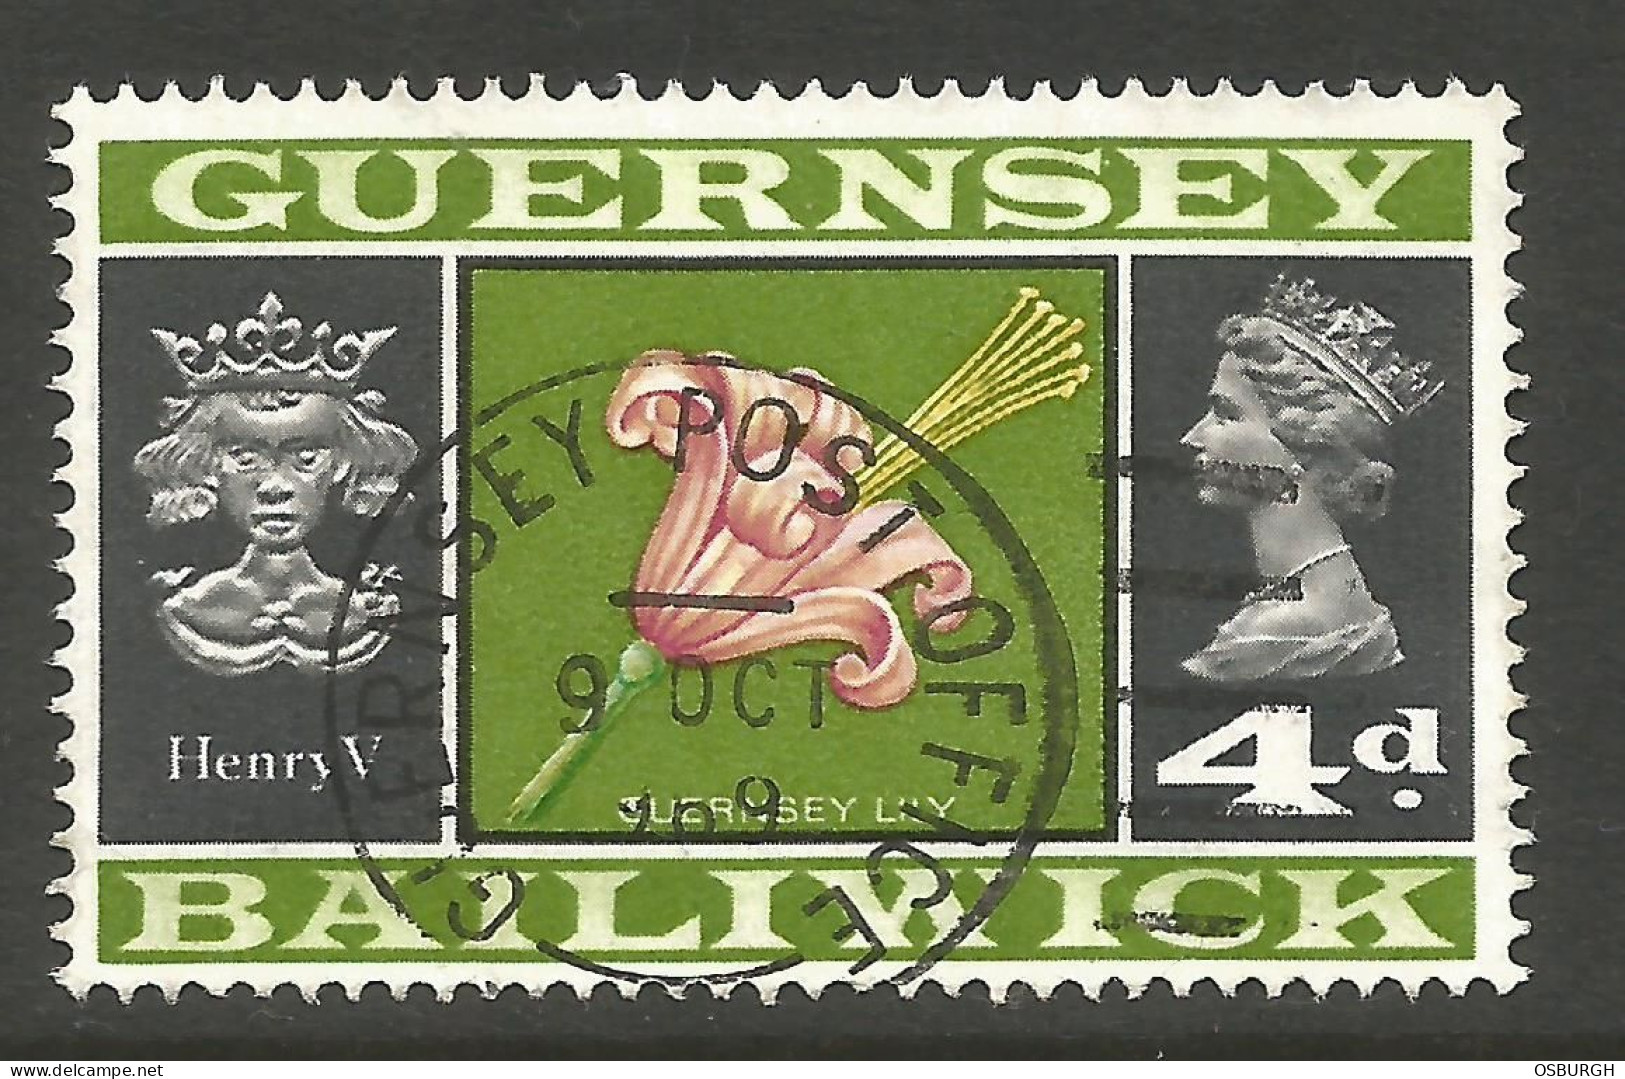 GREAT BRITAIN / GUERNSEY. 4d HENRY V USED. - Guernesey